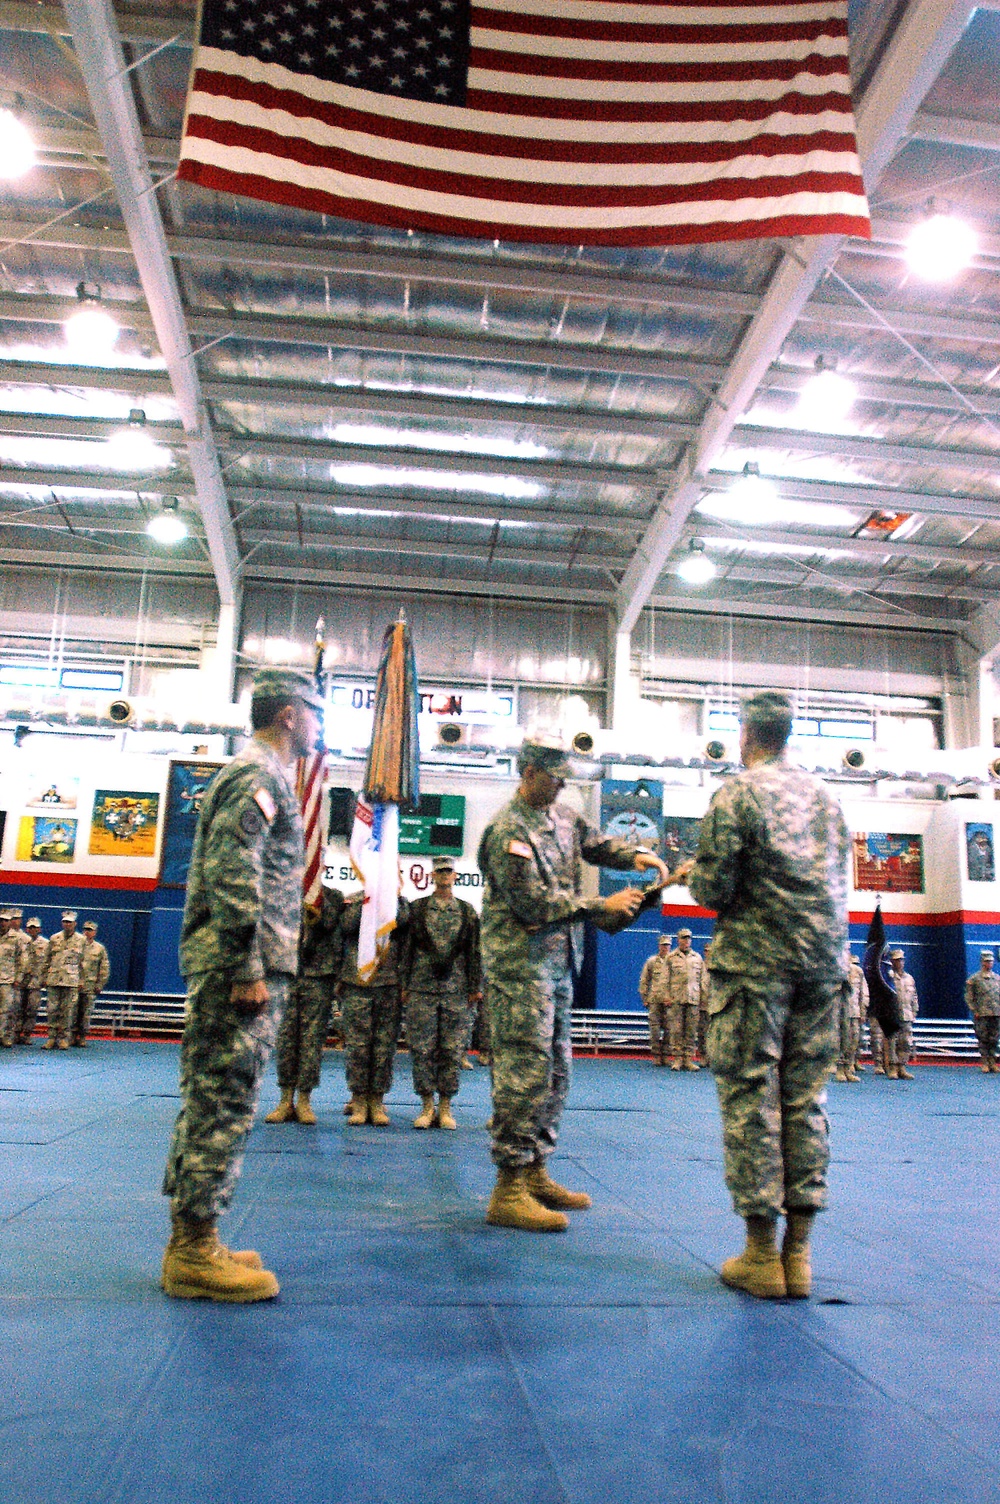 After Five Years, 143rd Transportation Command Cases Its Colors